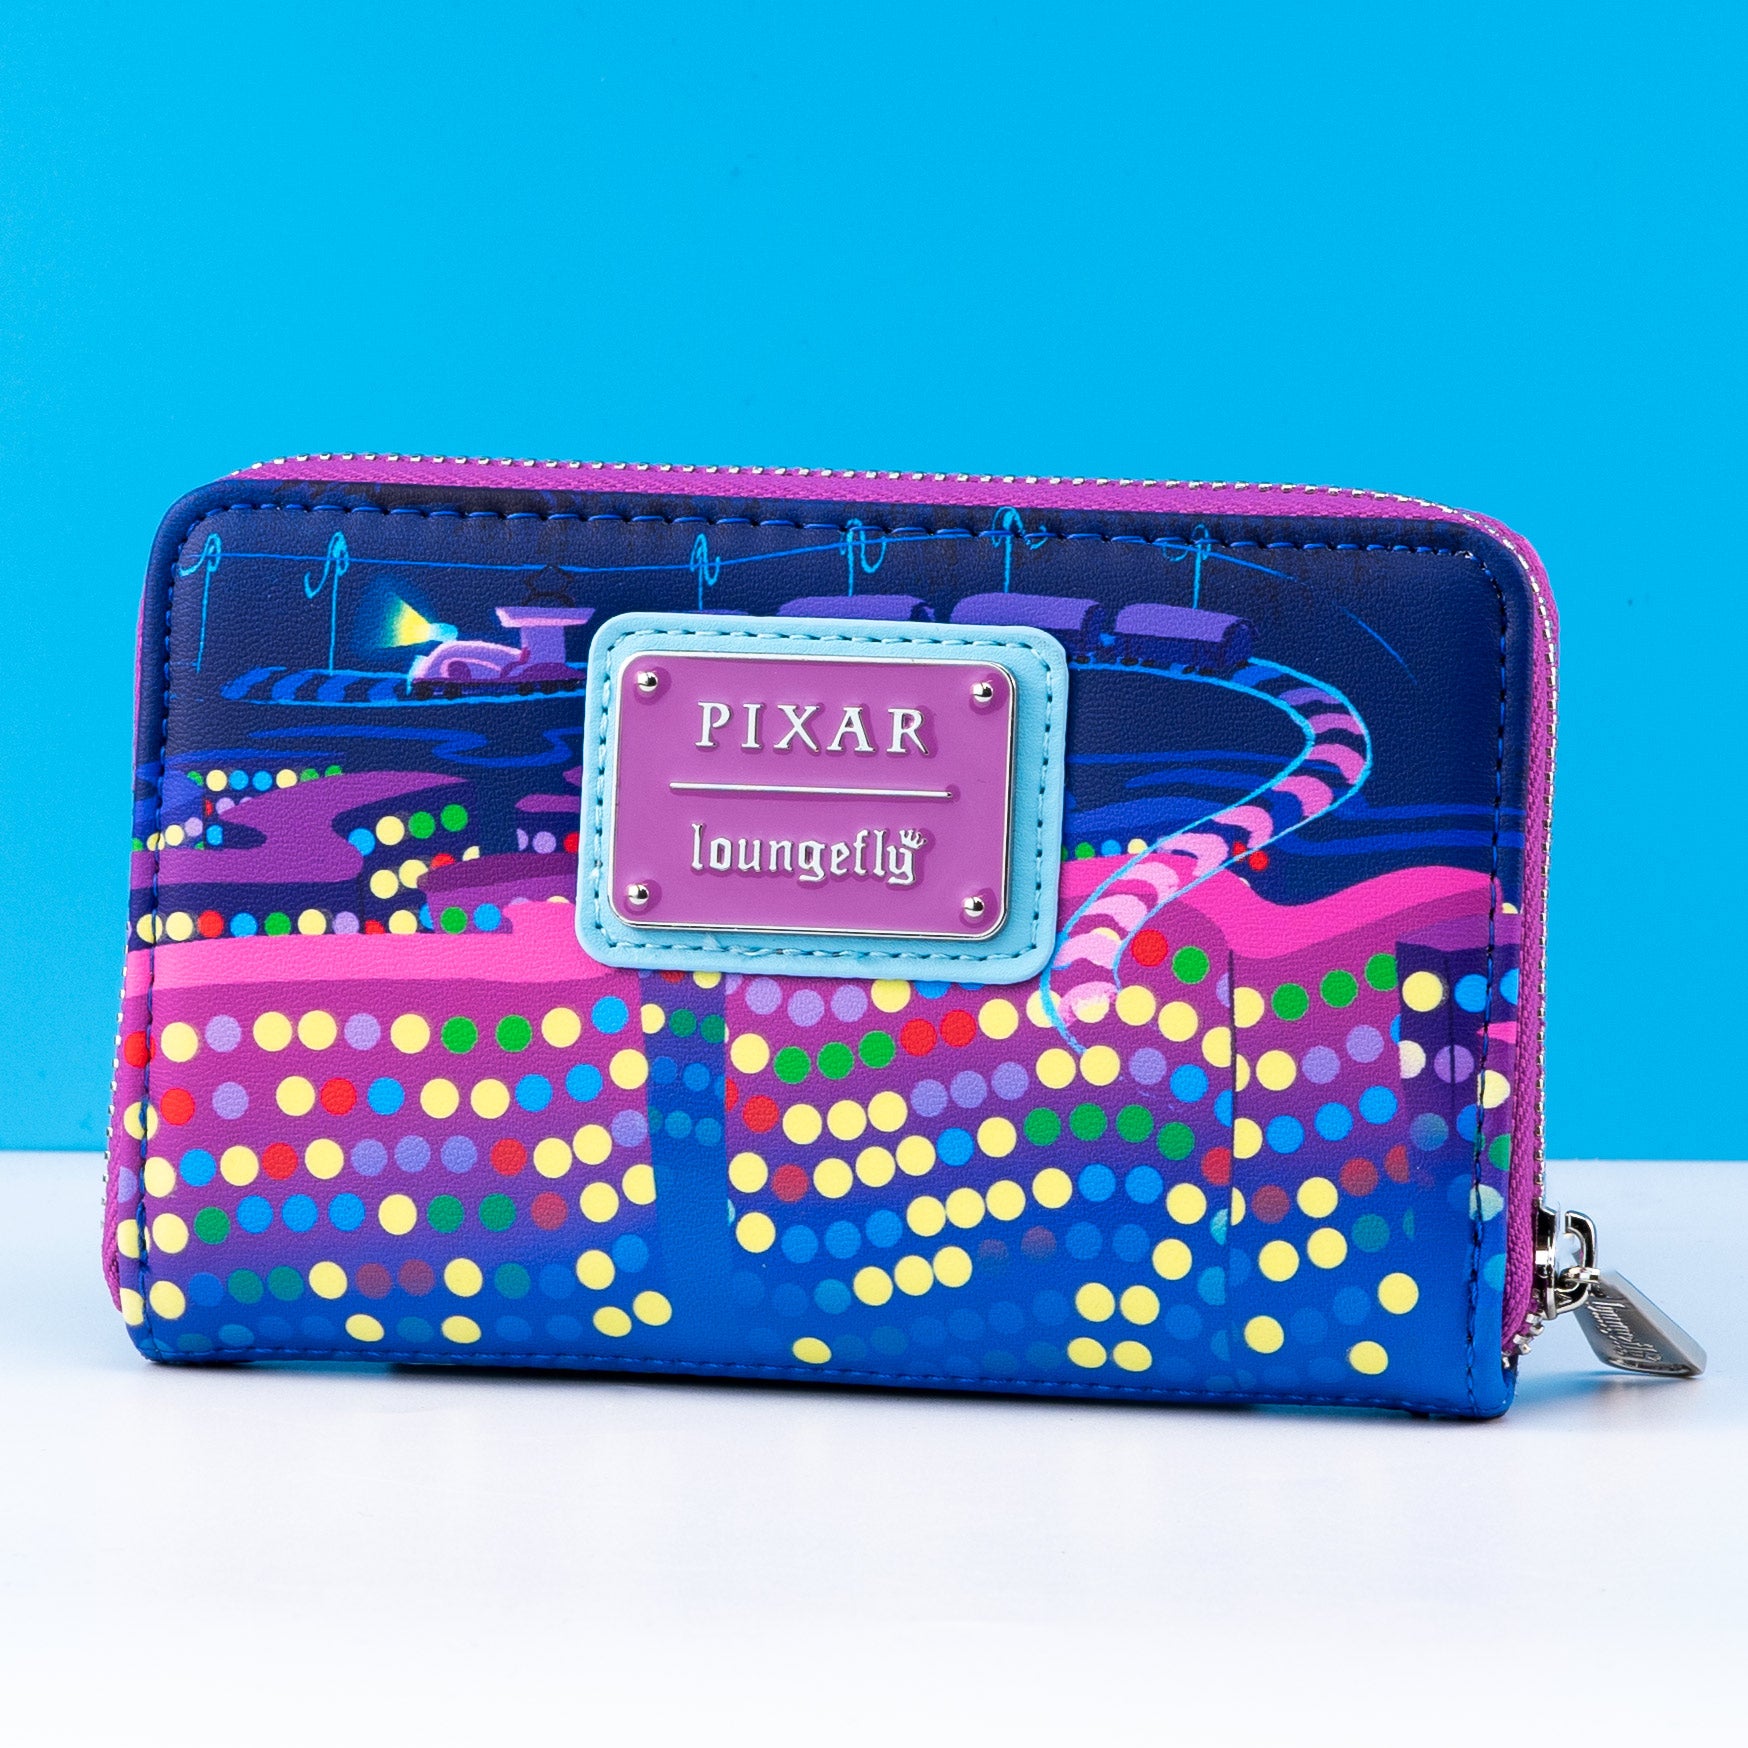 Loungefly x Disney Pixar Inside Out Control Panel Purse